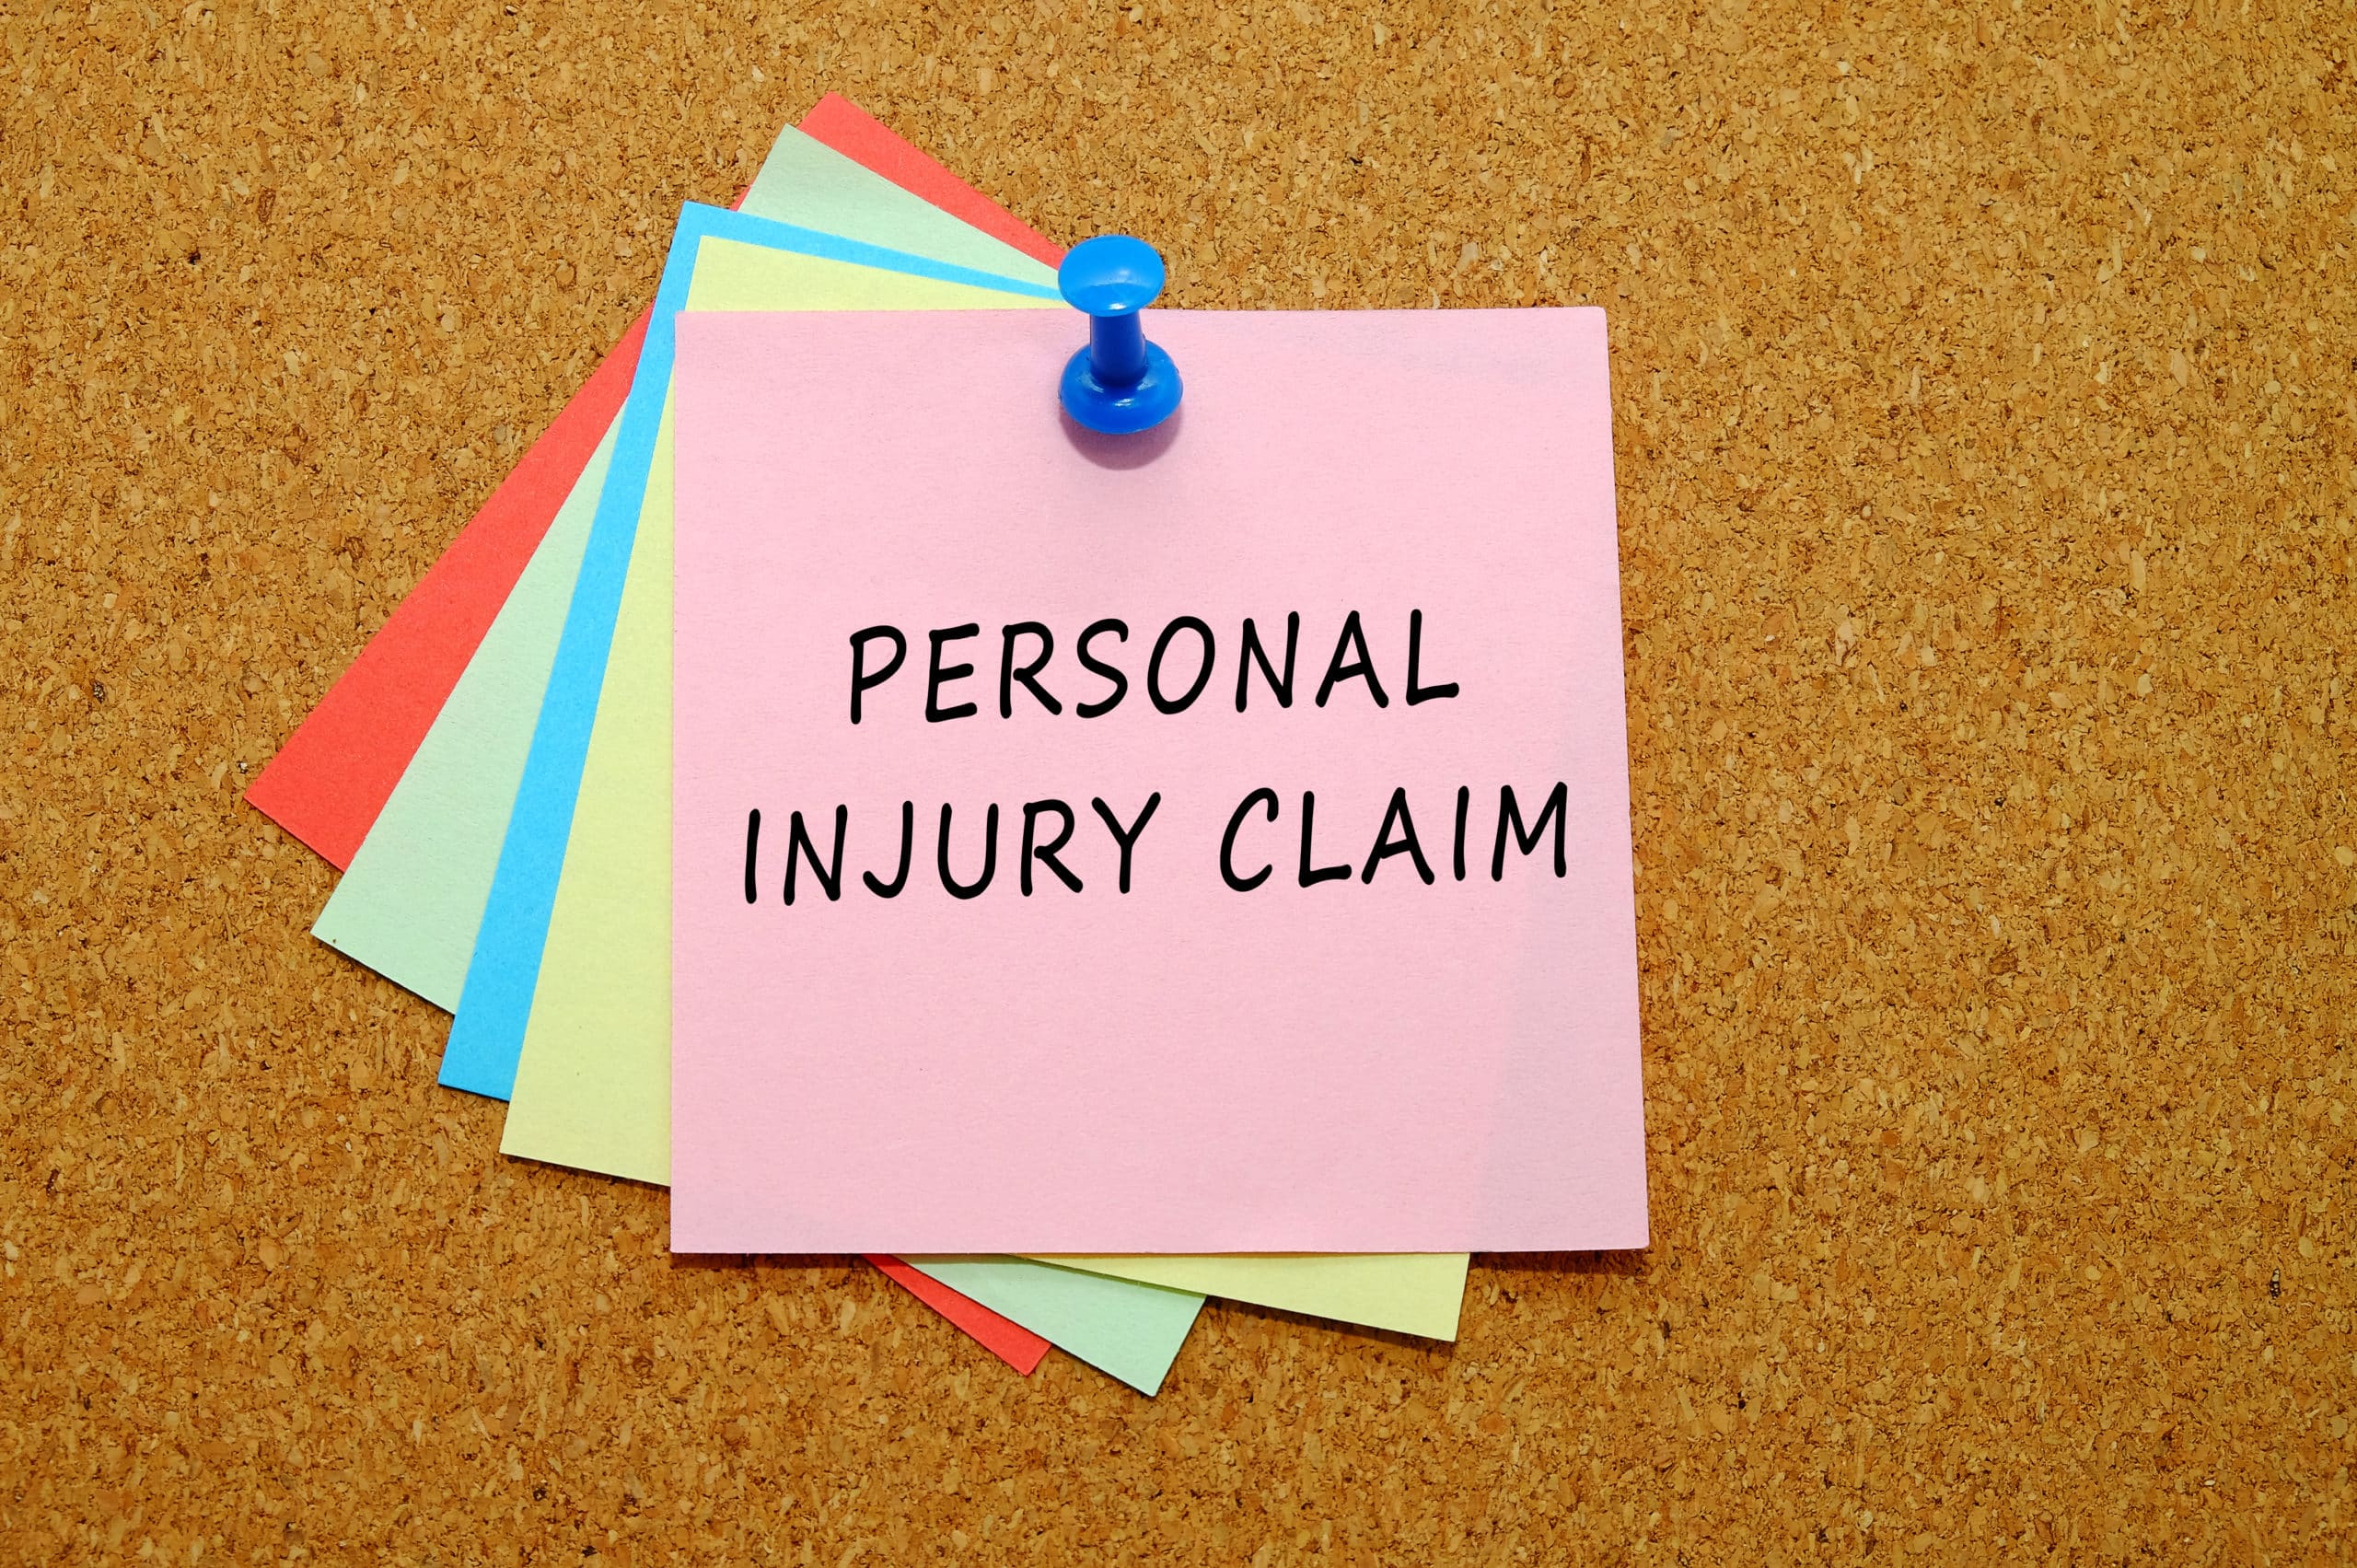 What Do I Need to Know About Suing for Personal Injury Damages in Texas?